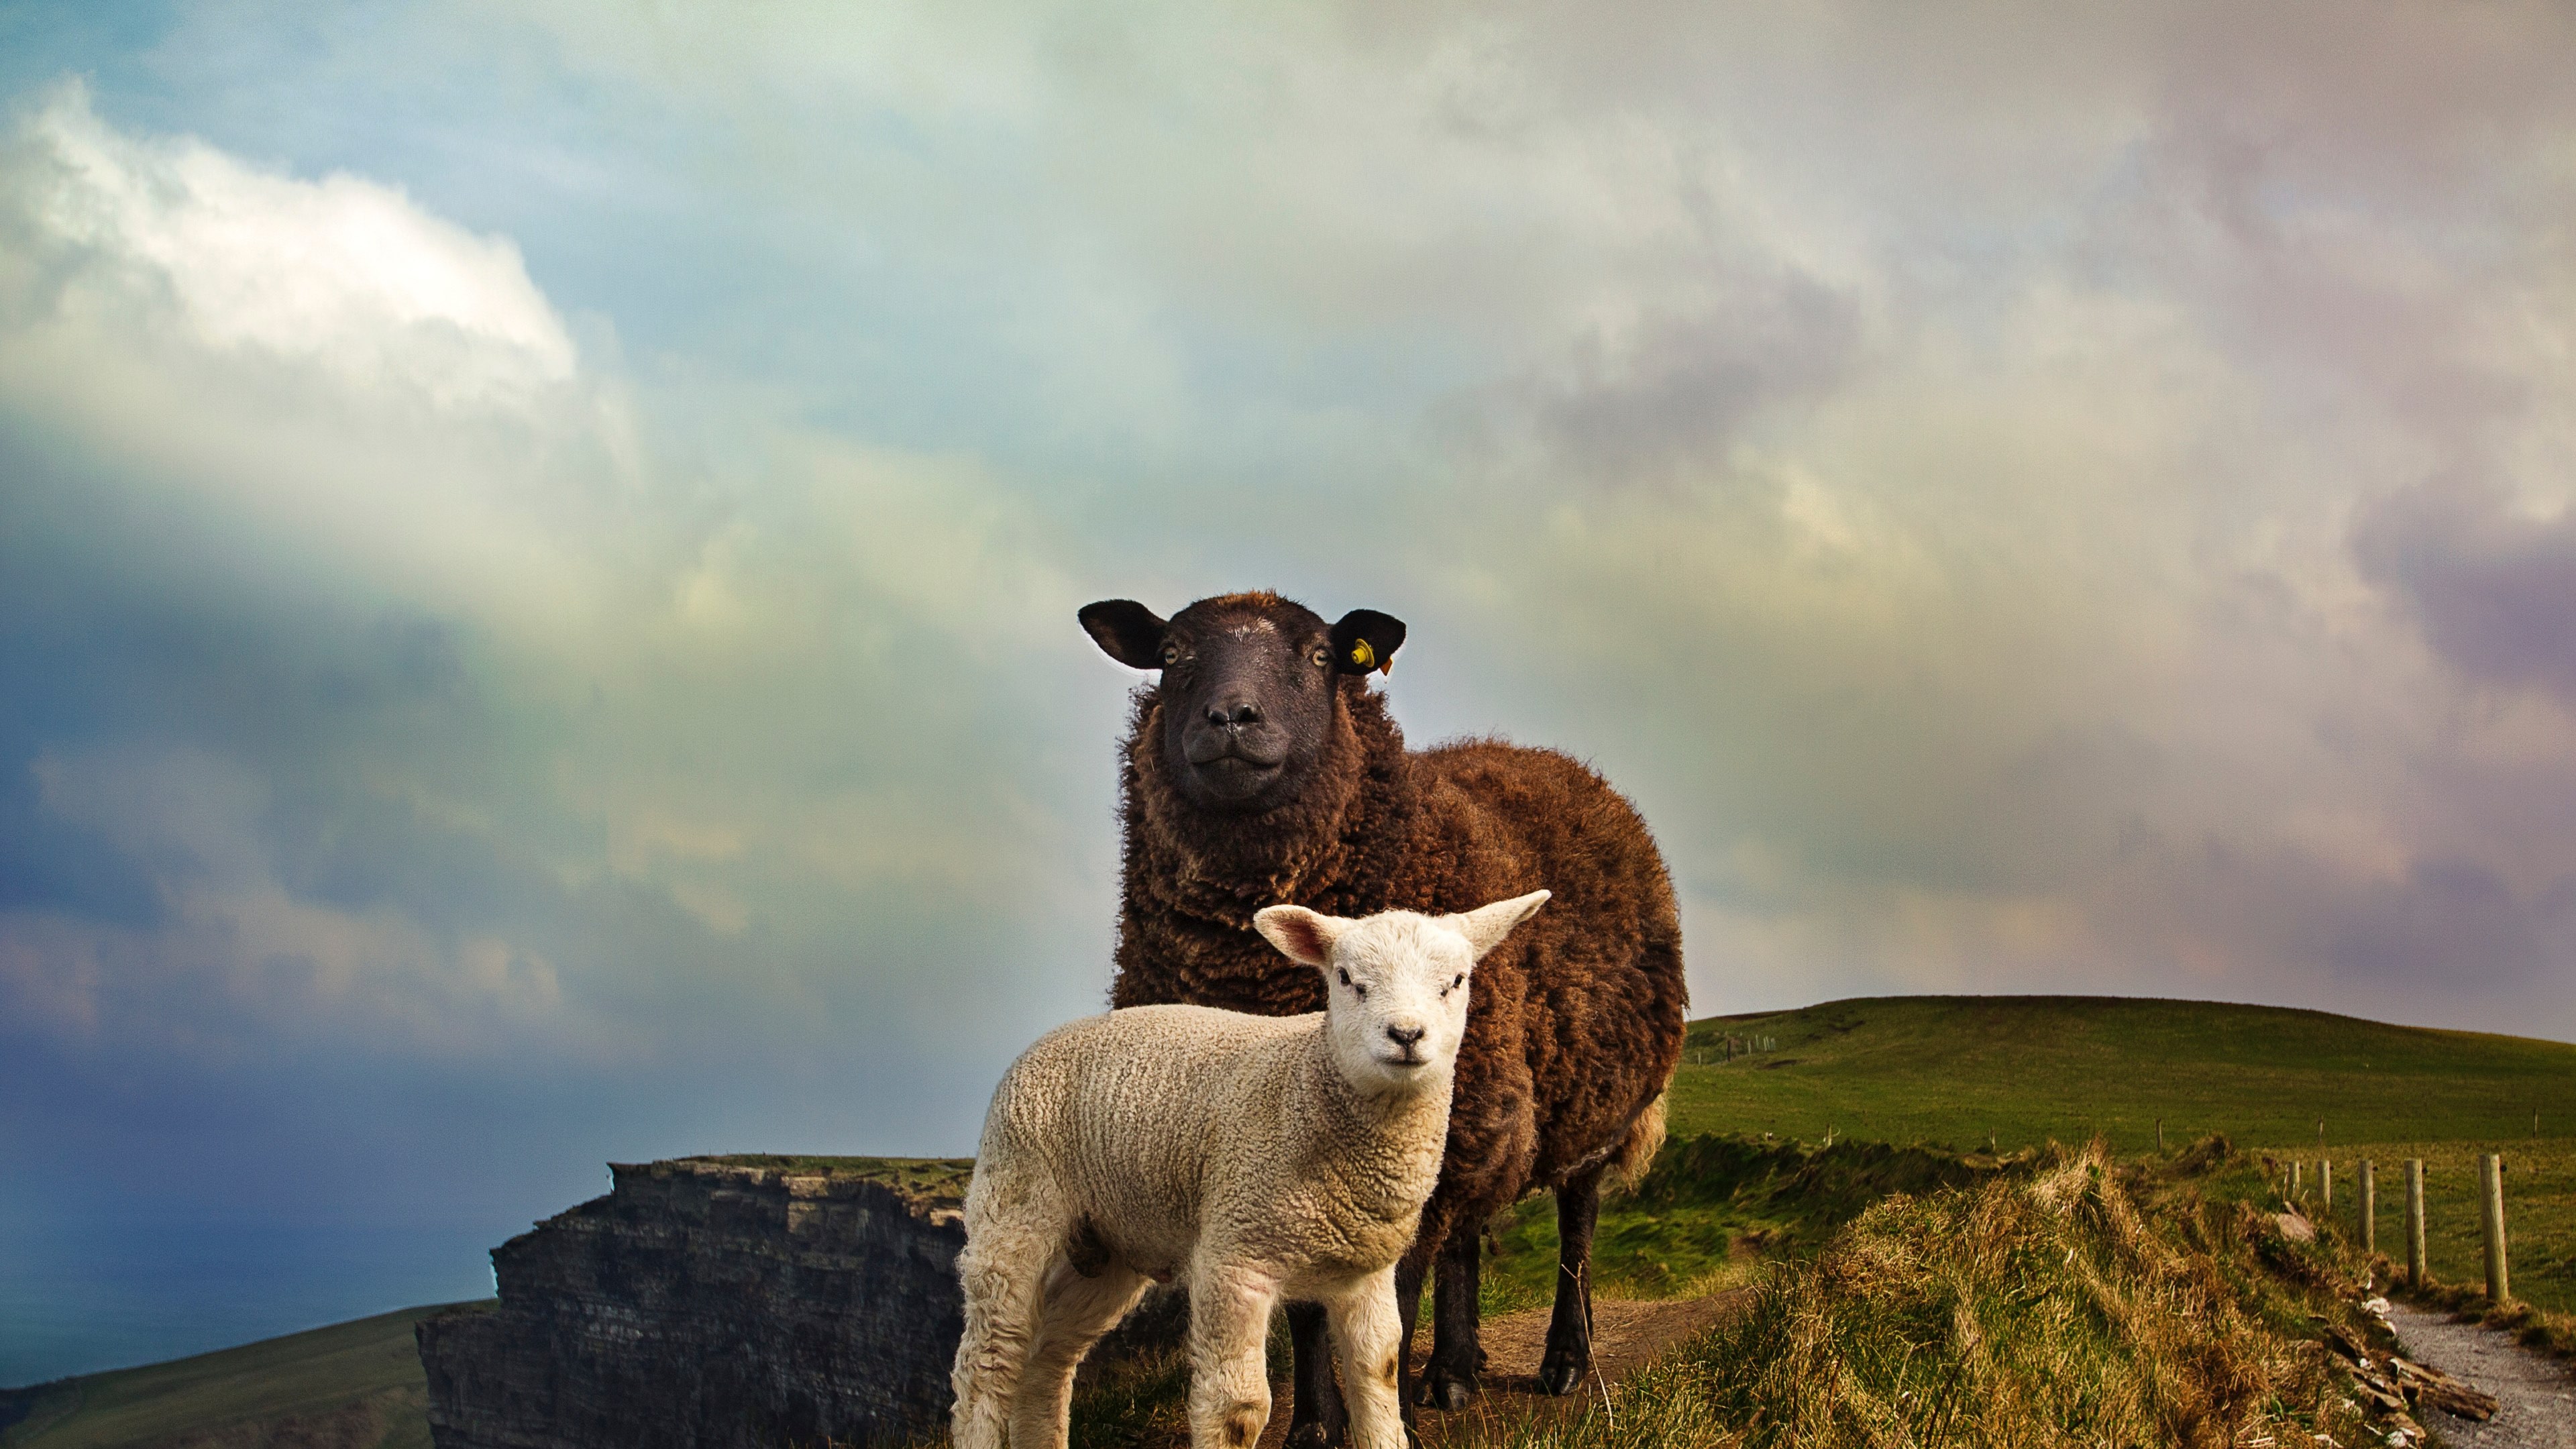 Wallpaper / brown sheep and white lamb stand on grassy hillside, sheep and lamb on hill 4k wallpaper free download